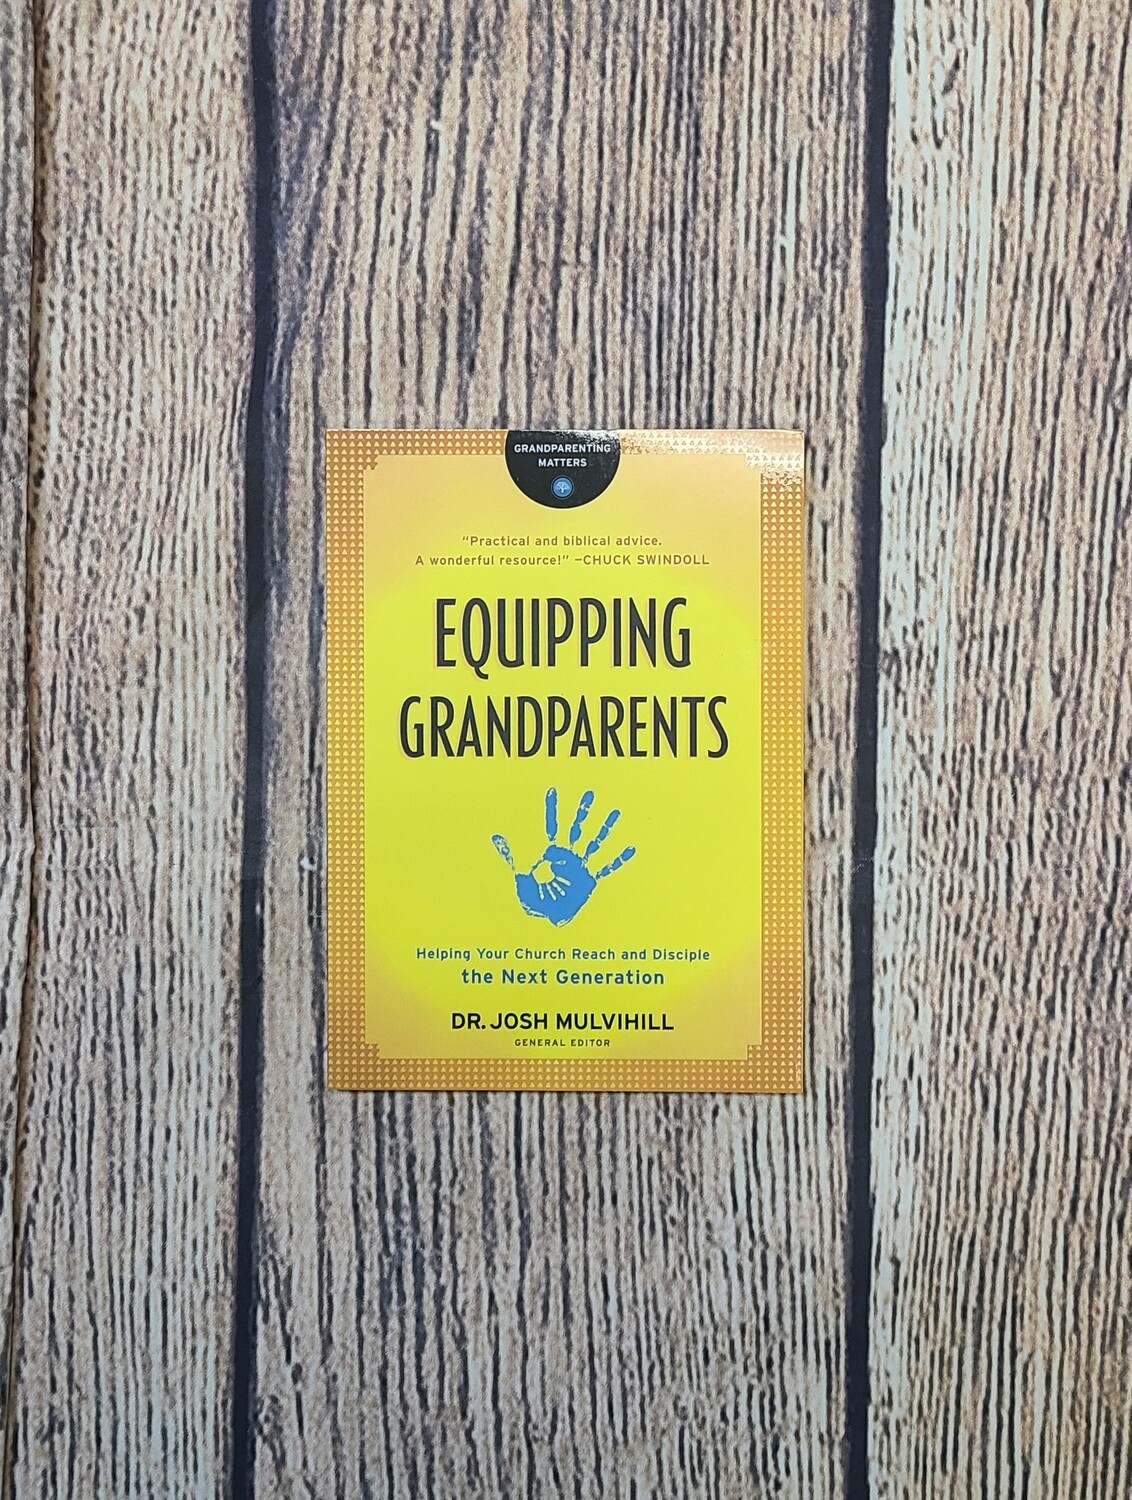 Equipping Grandparents by Dr. Josh Mulvihill